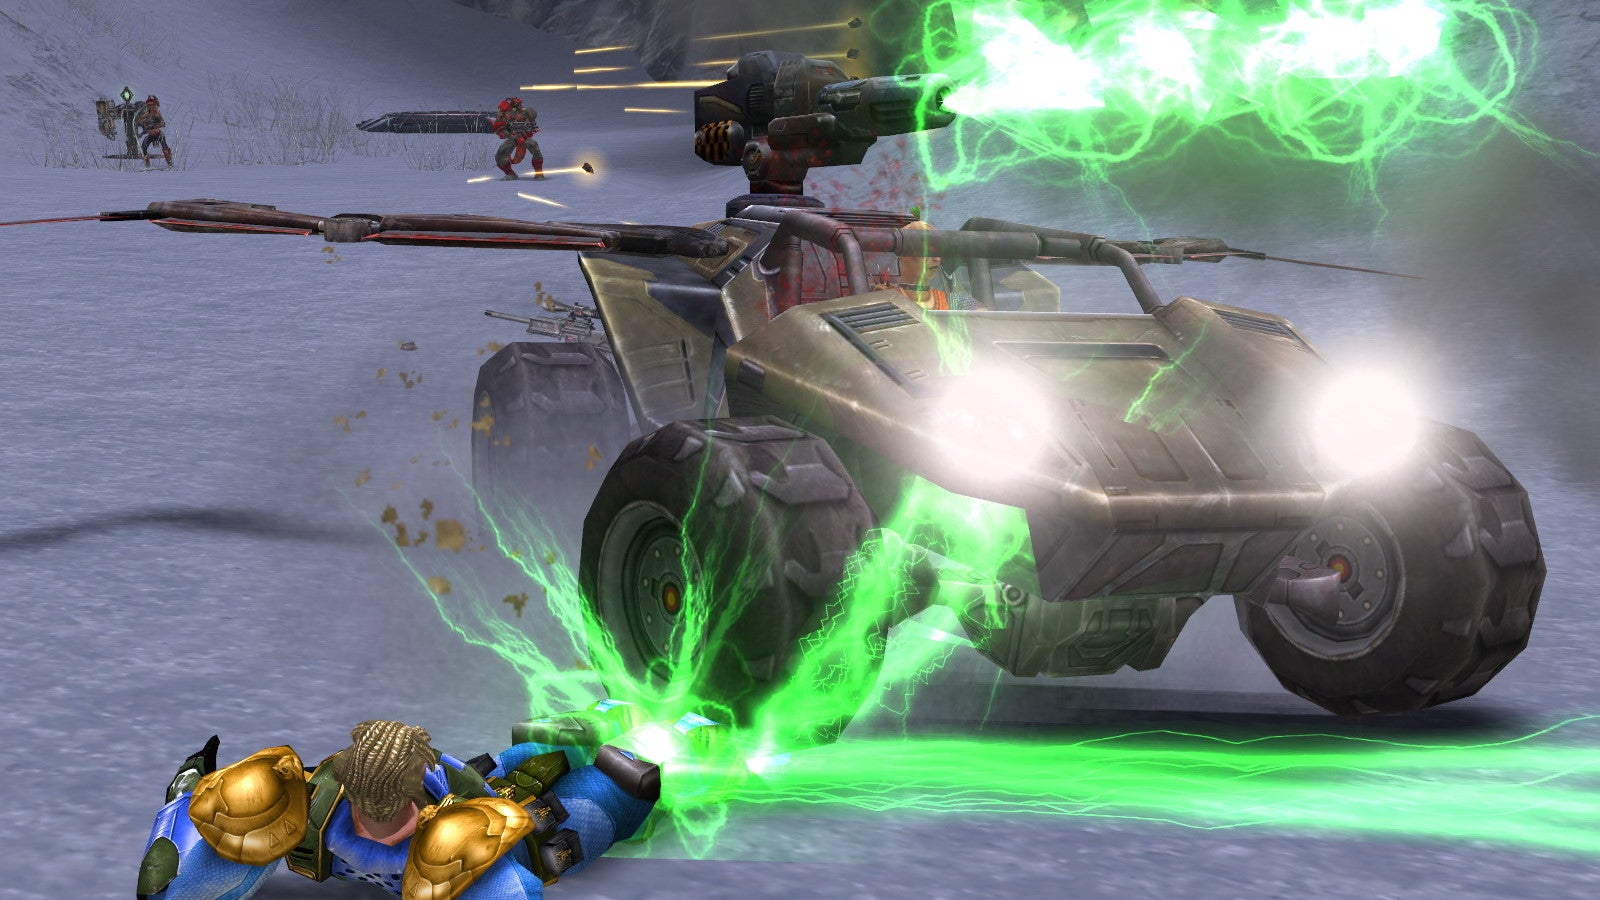 A soldier in blue armour gets crushed by another player in a car shooting green lasers in Unreal Tournament 2004